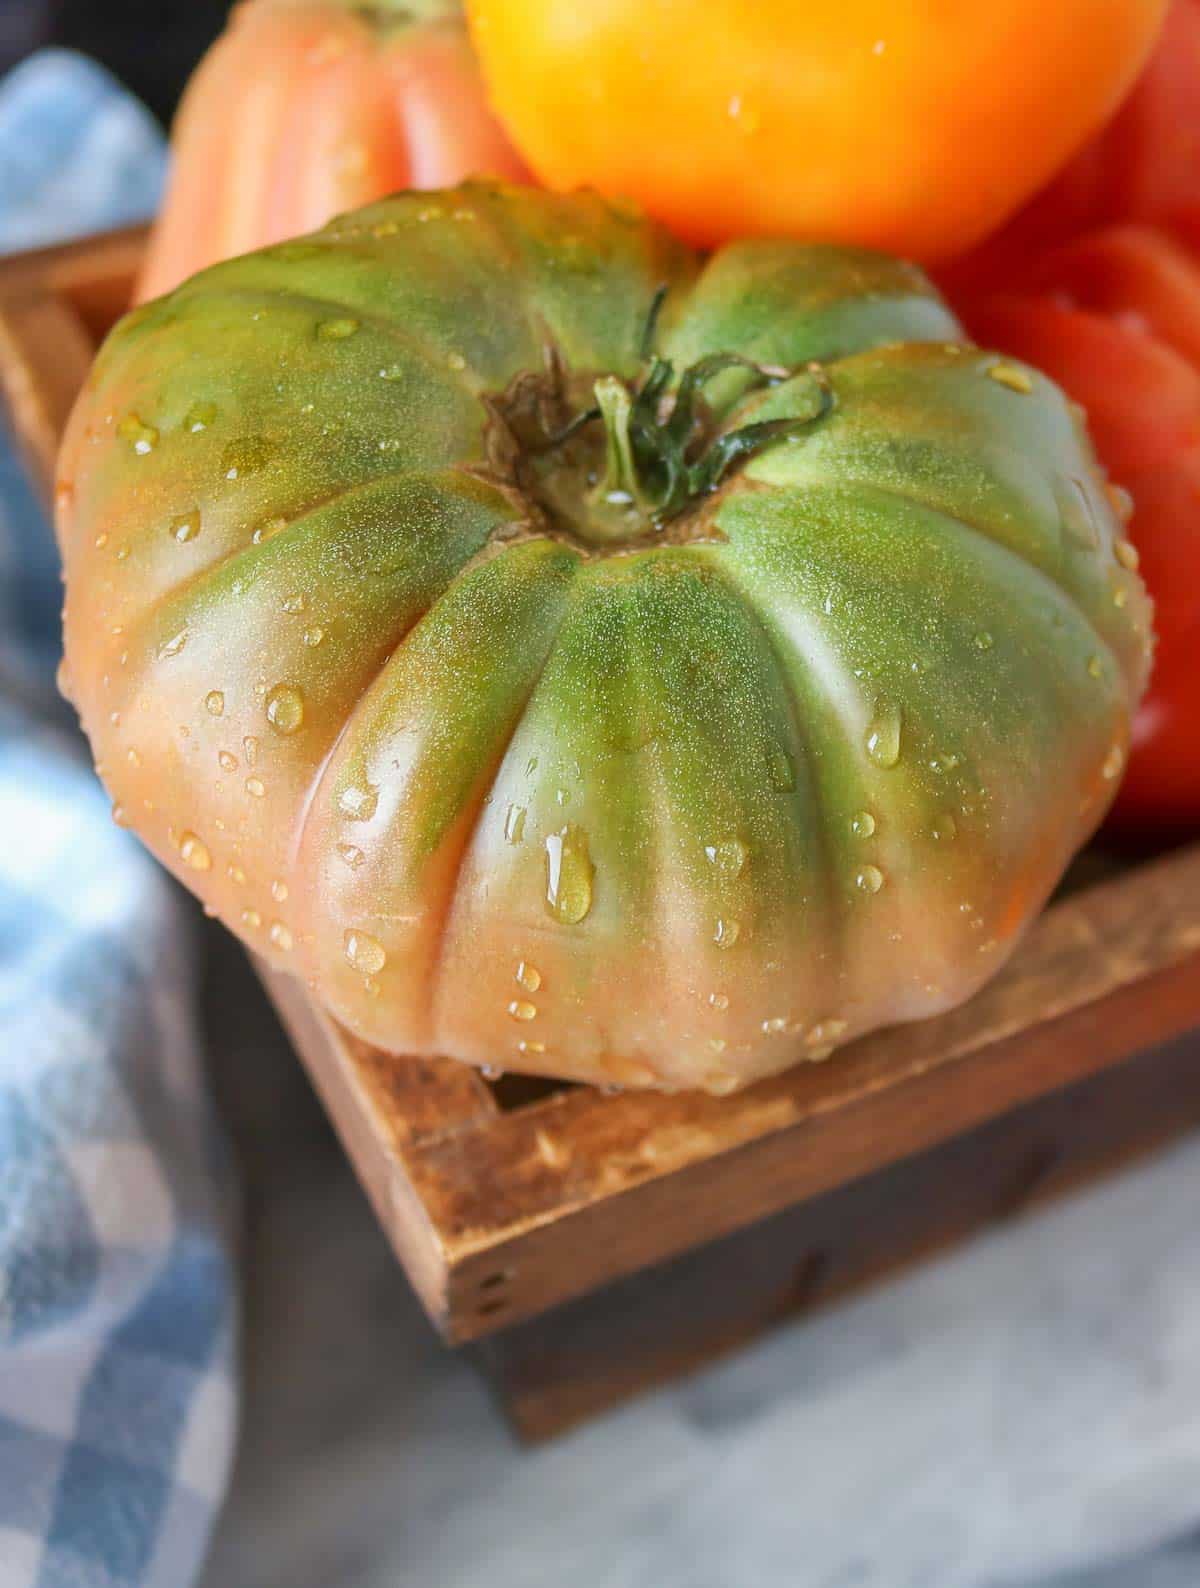 Close-up of a heirloom tomato with drops of water on it after being washed.